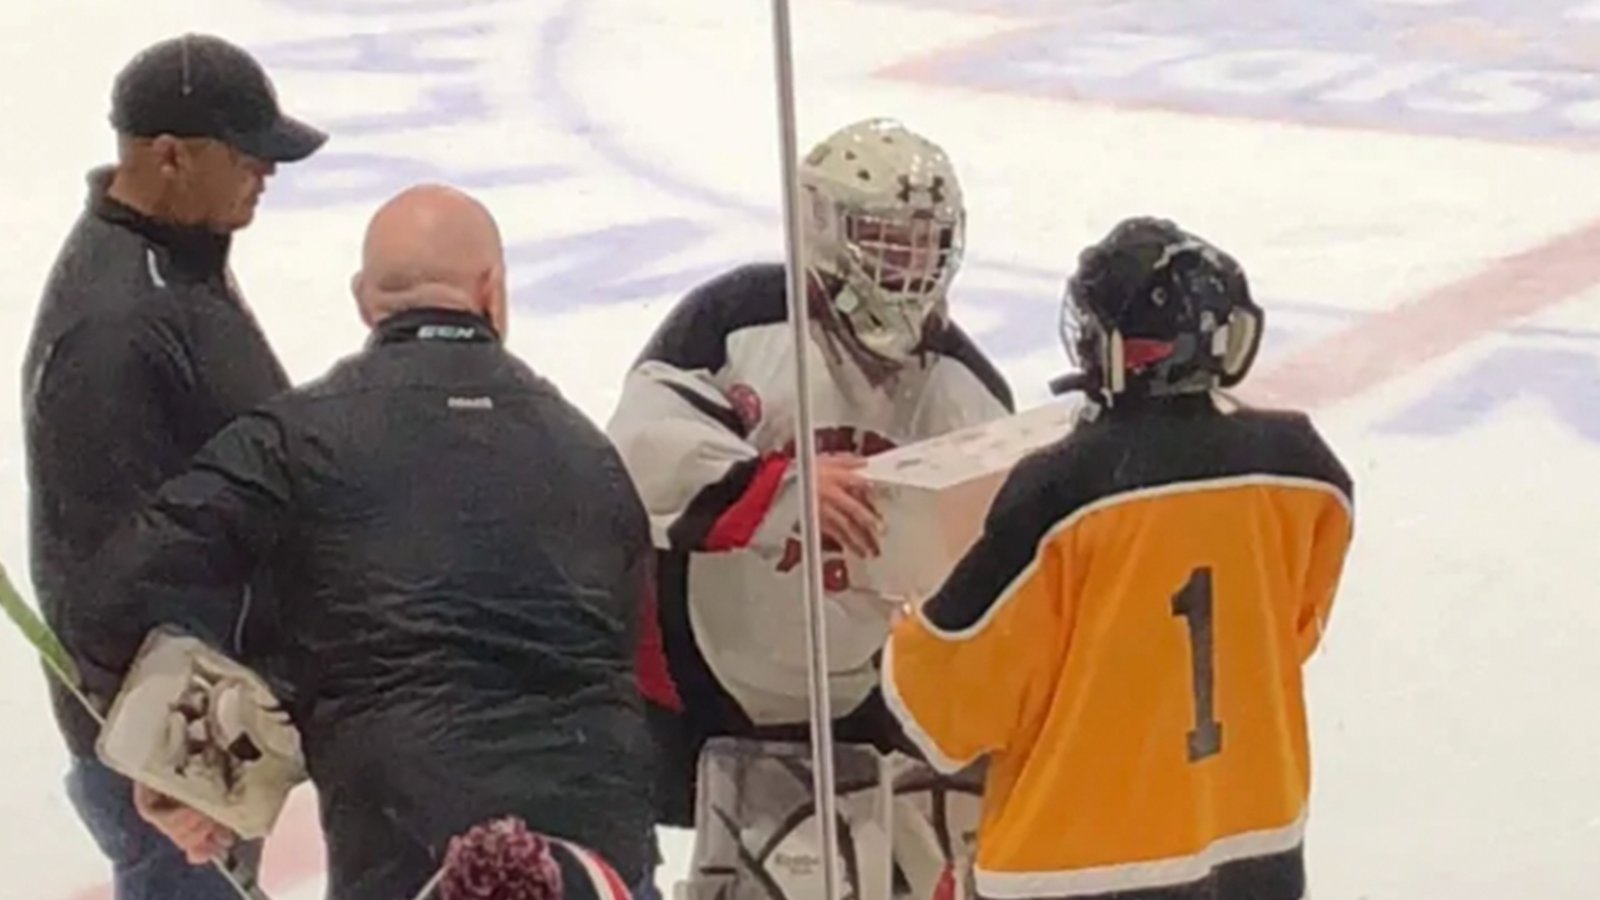 12-year-old goalie battling cancer gets special gift from opponents